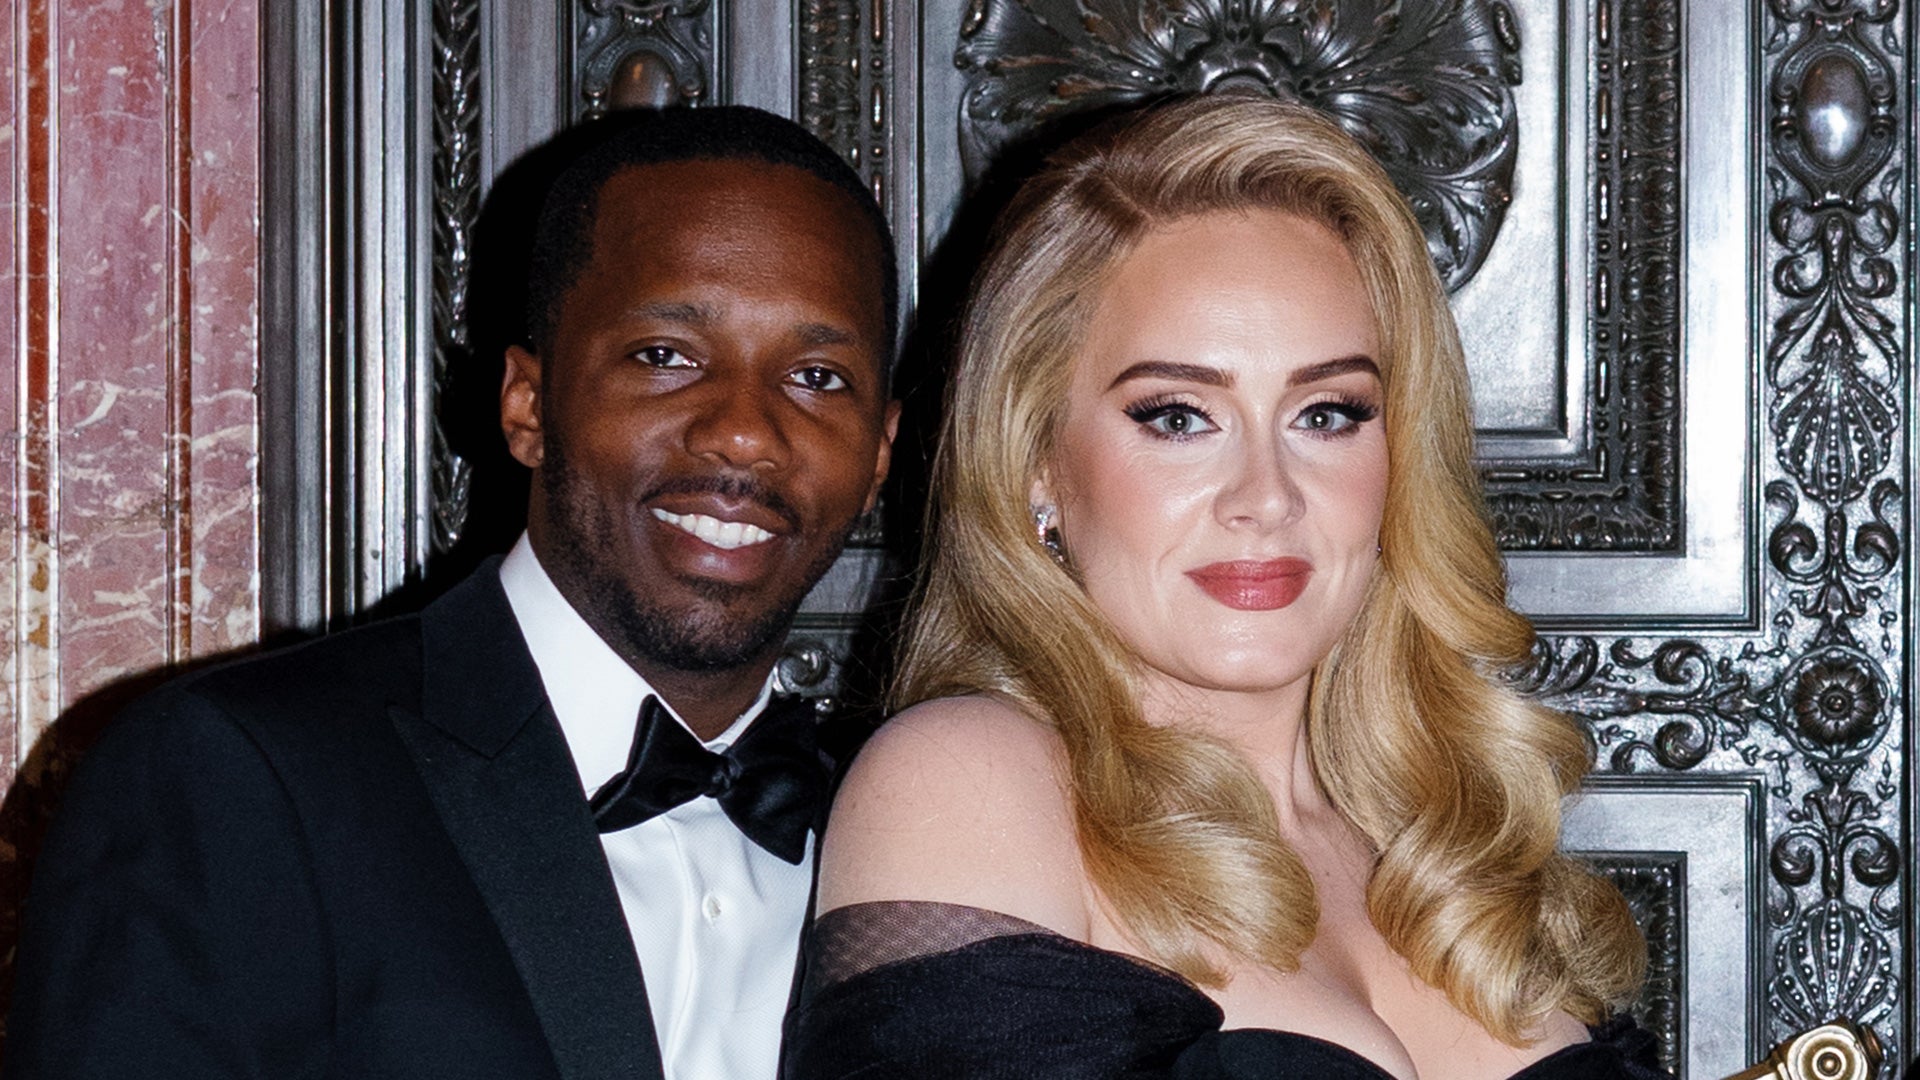 Adele Shares Sweet Words of Encouragement From Boyfriend Rich Paul | Entertainment Tonight